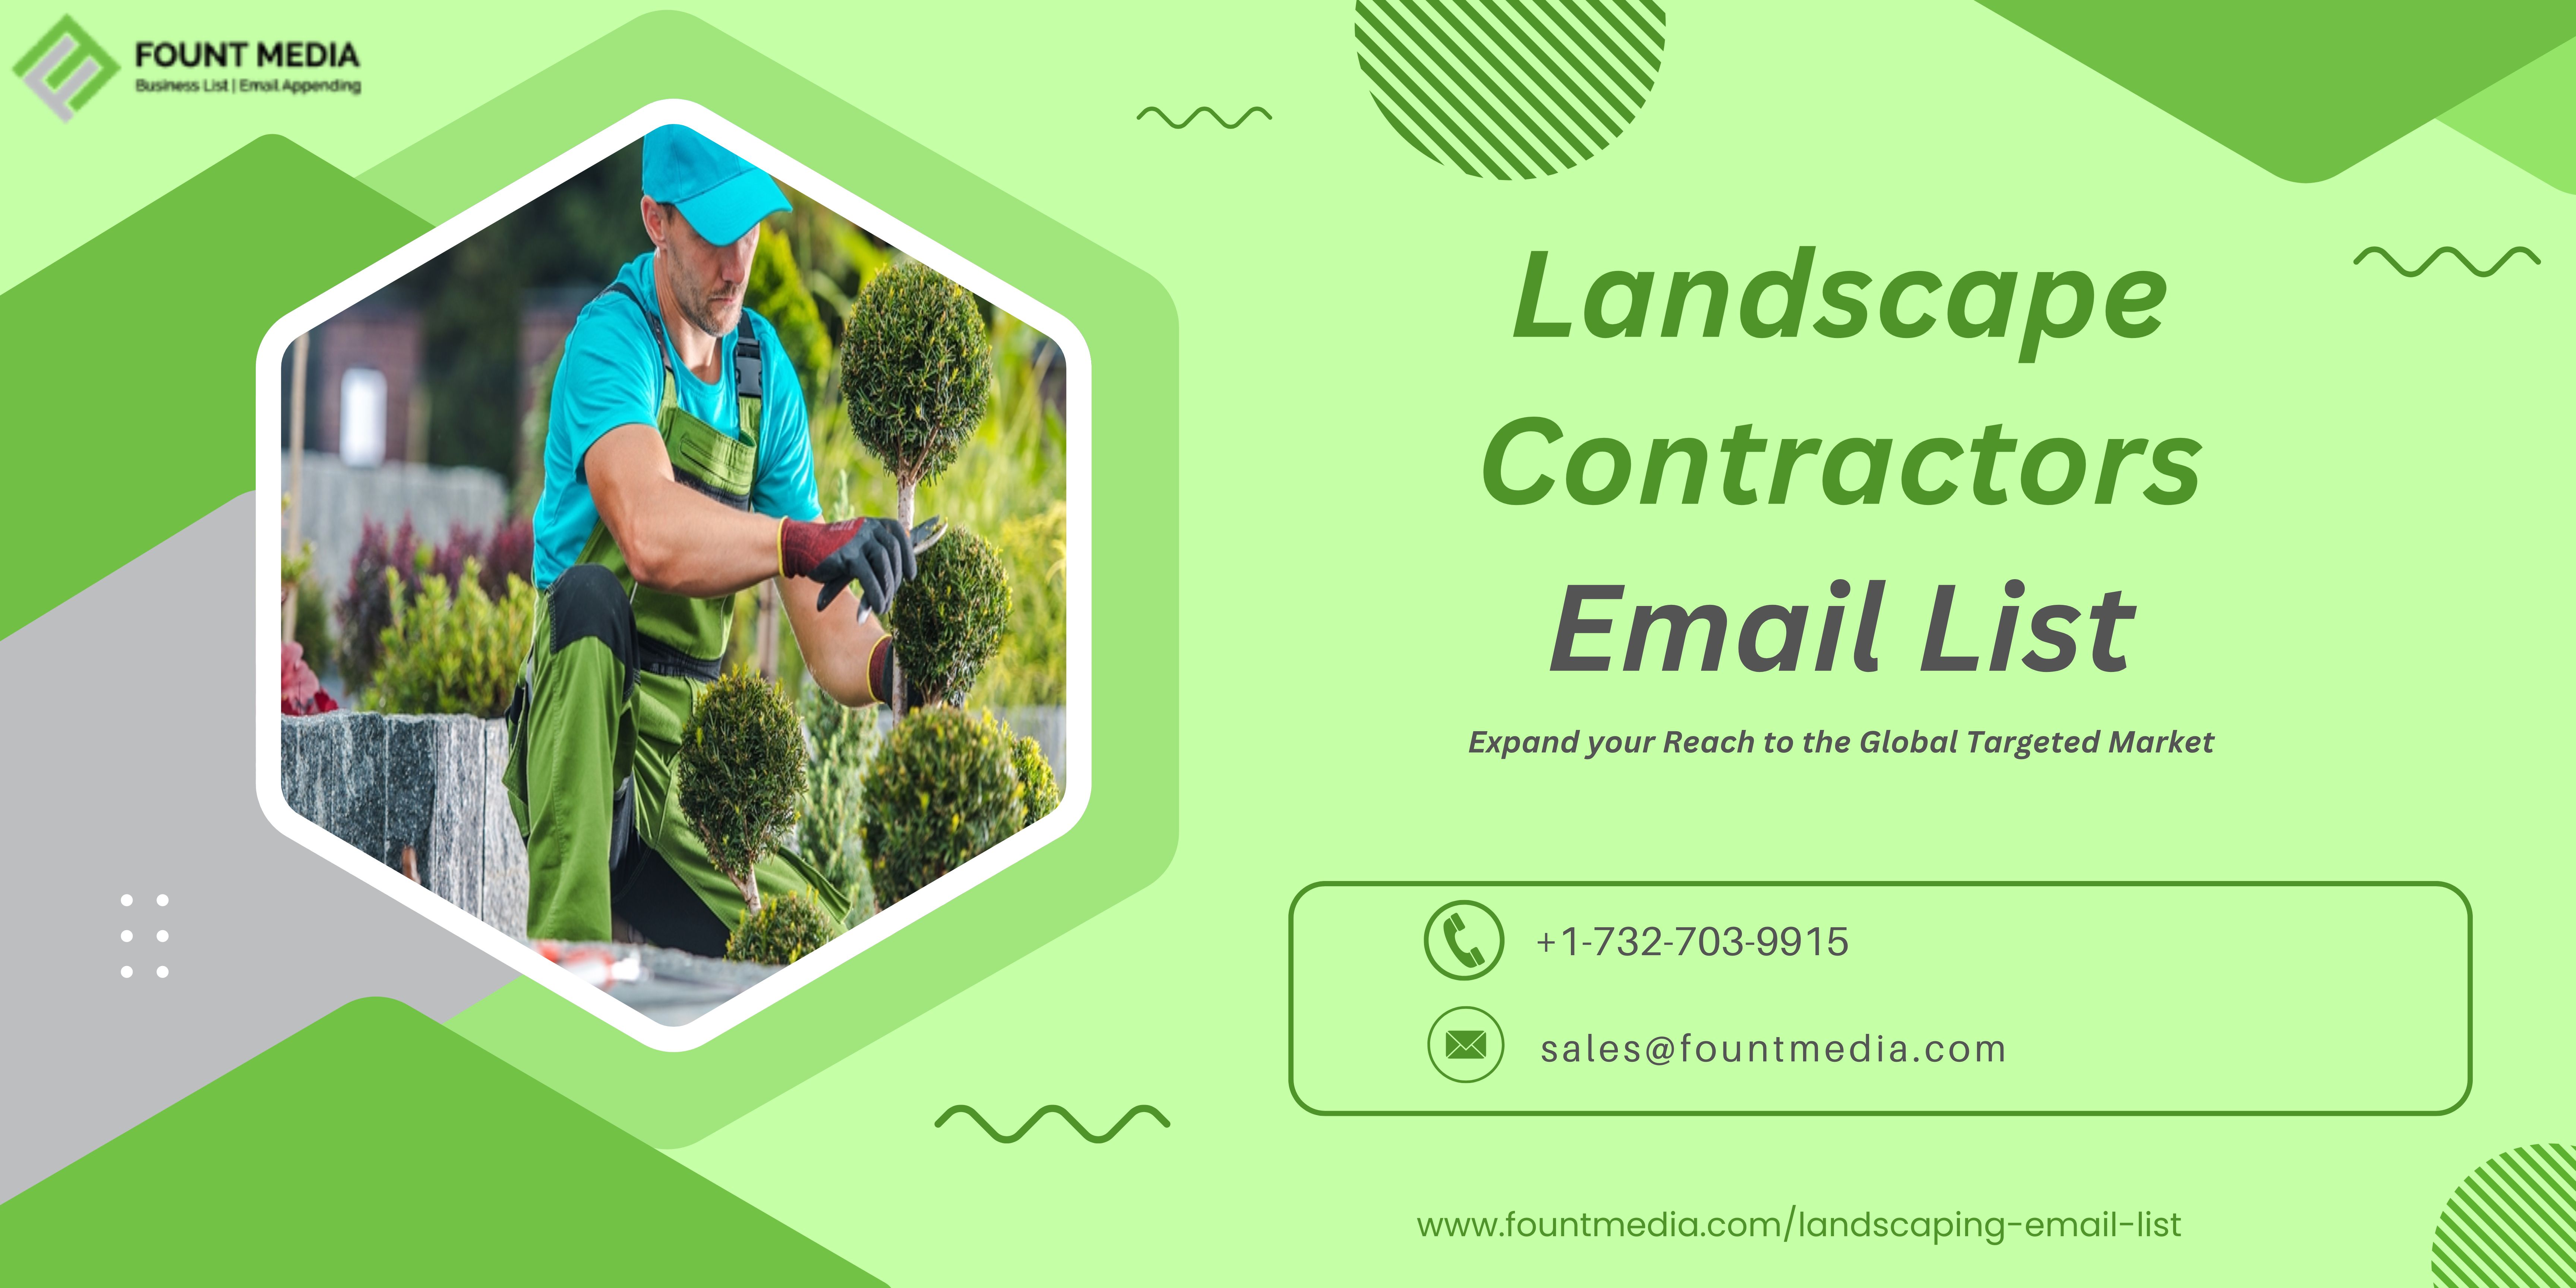 Boost Your Business ROI with our Landscape Contractors Email Database